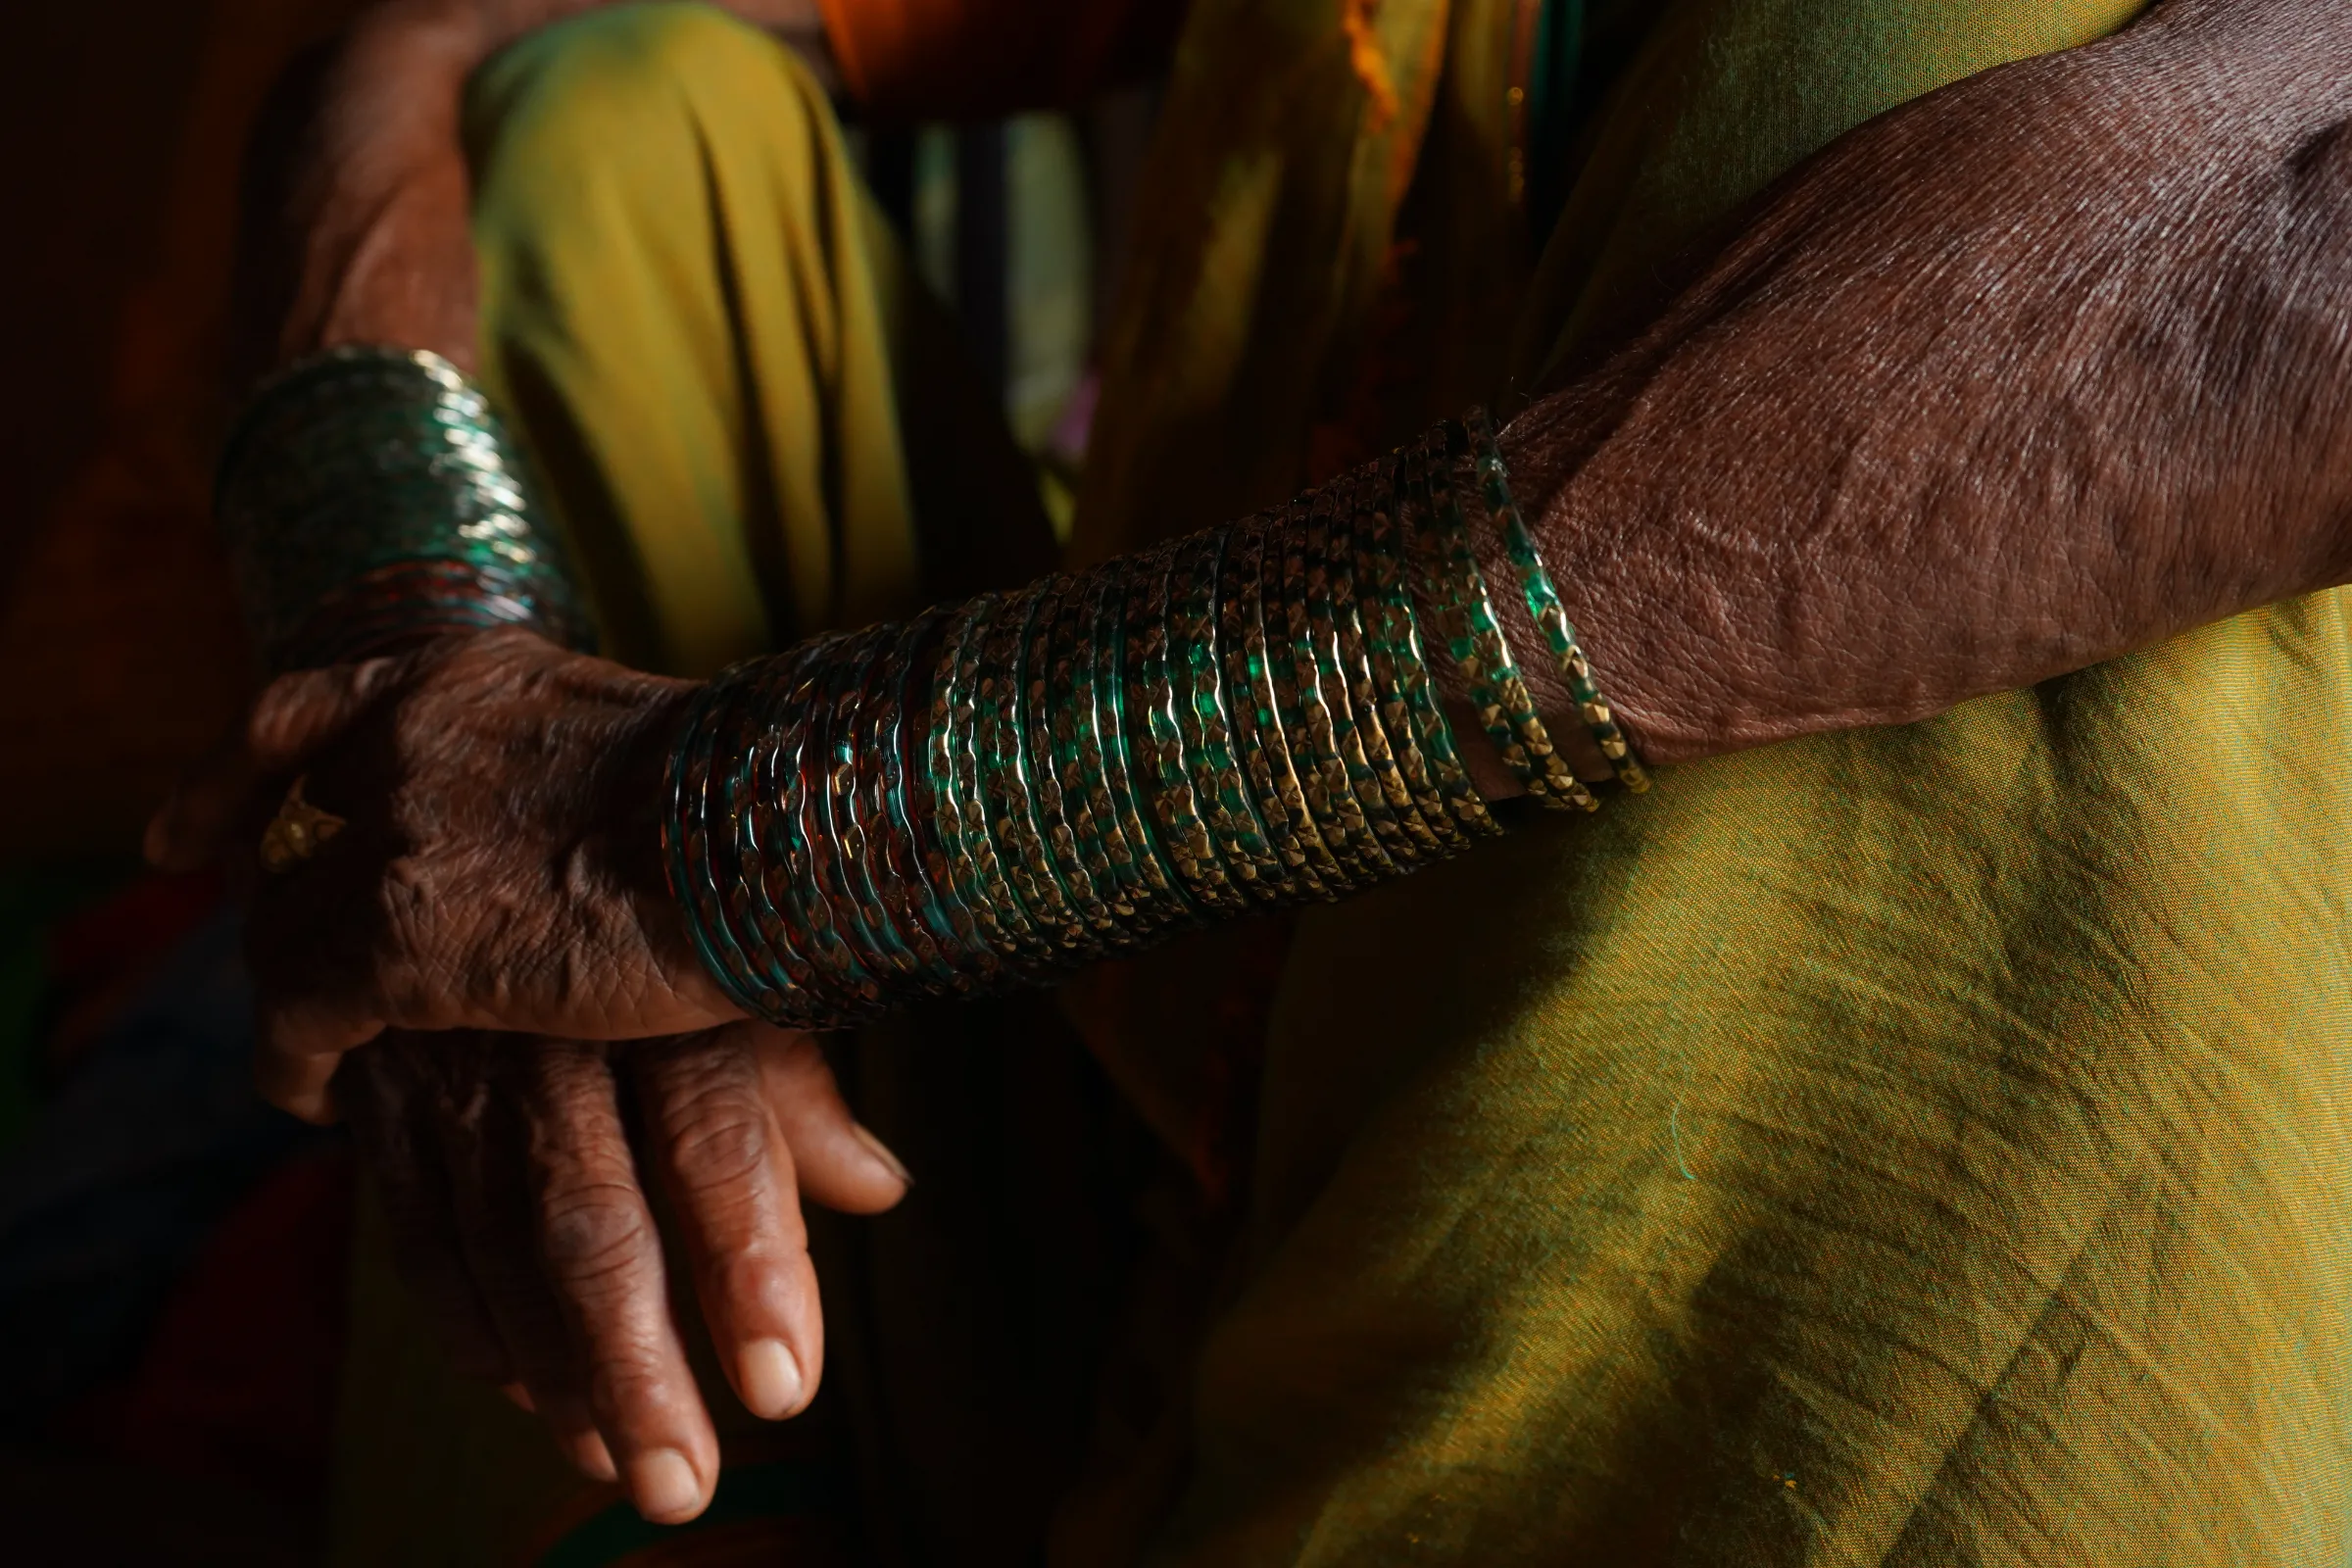 Farmer Hirabai Shankar Kalel sits on the floor, wrapping her hands covered with glass bangles around her legs, at Jambhulni village in Satara district, India, September 14, 2022